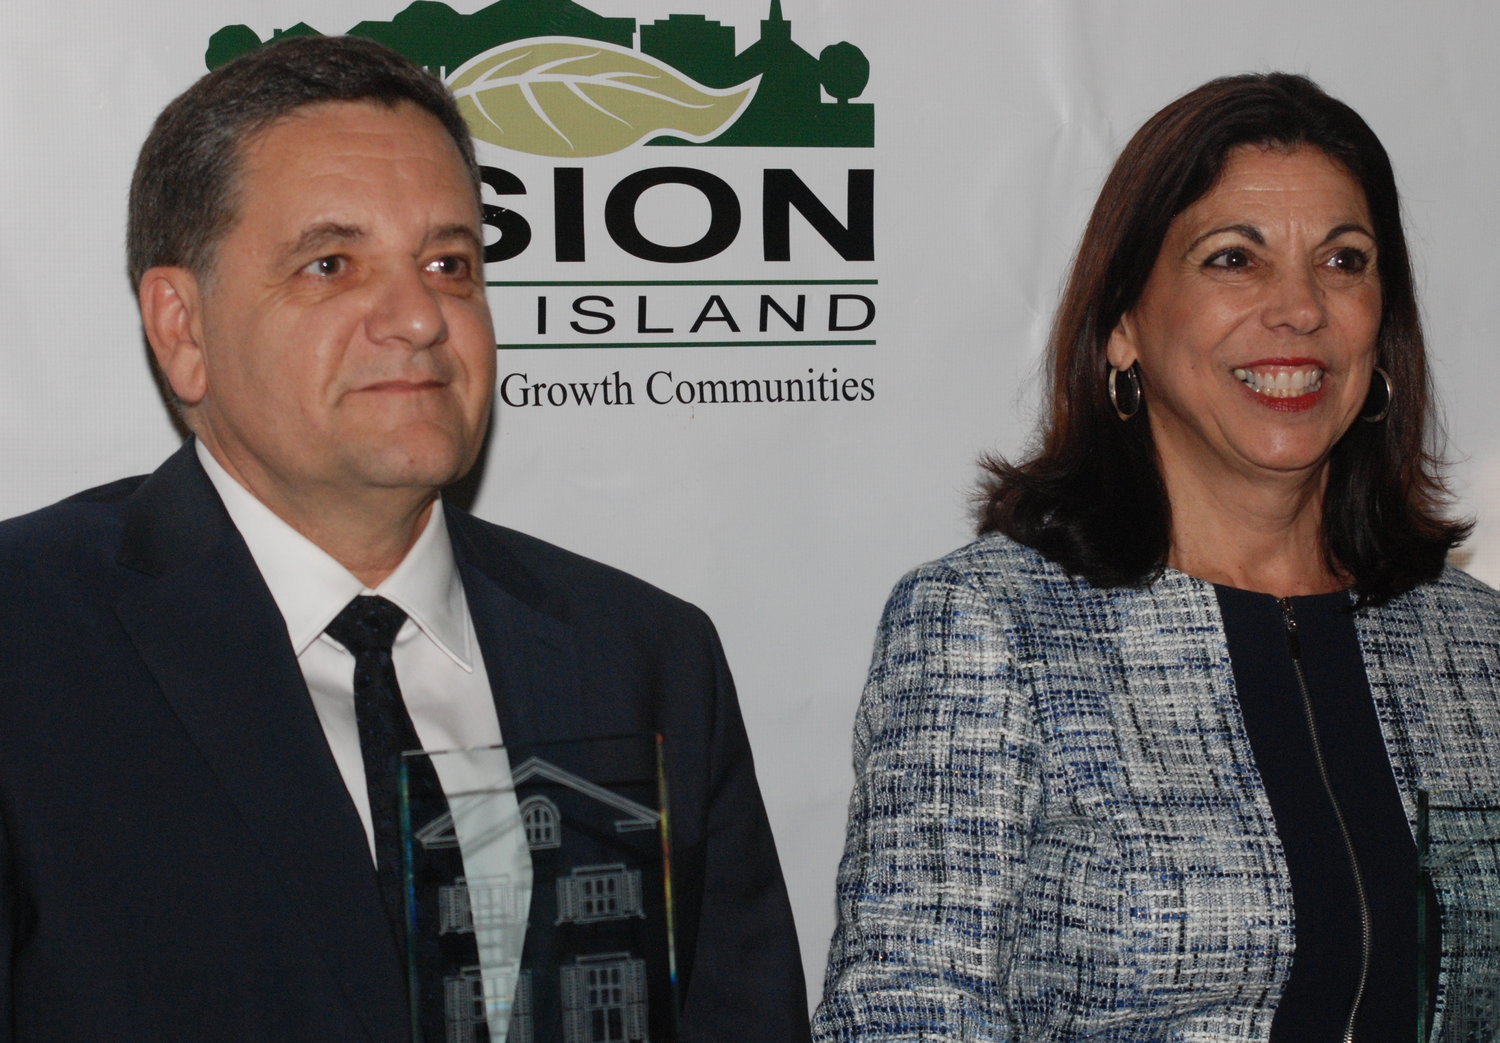 Barbara deGrace, who recently retired as Valley Stream’s deputy clerk, has seen and been a part of a lot of change and growth in the village. She joined local developer Vassilios Kefalas in accepting Vision Long Island’s Smart Growth Award in 2019 for the village.